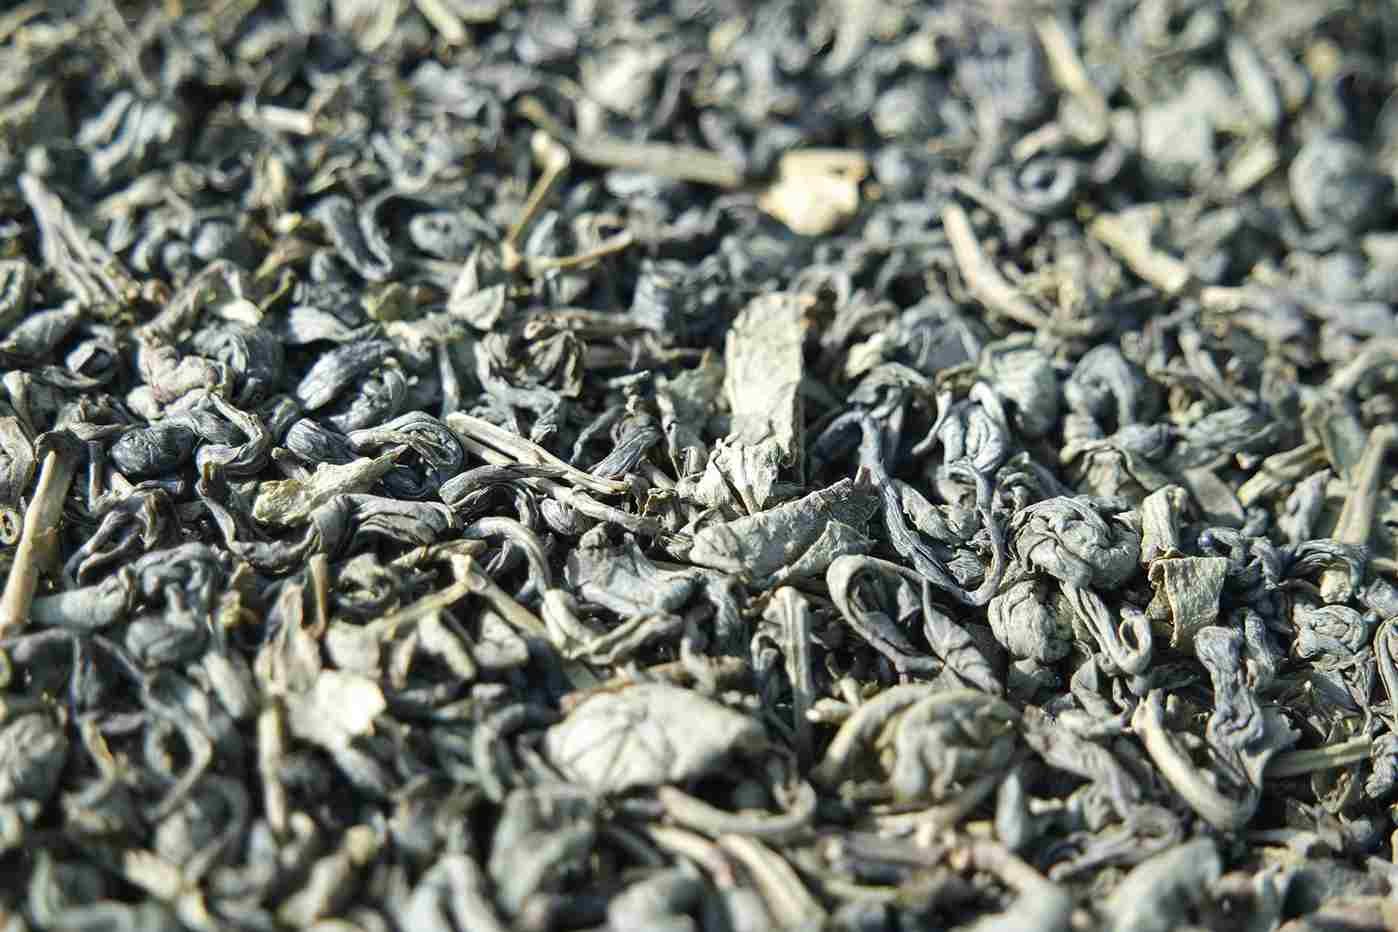 green tea leaves and l-theanine